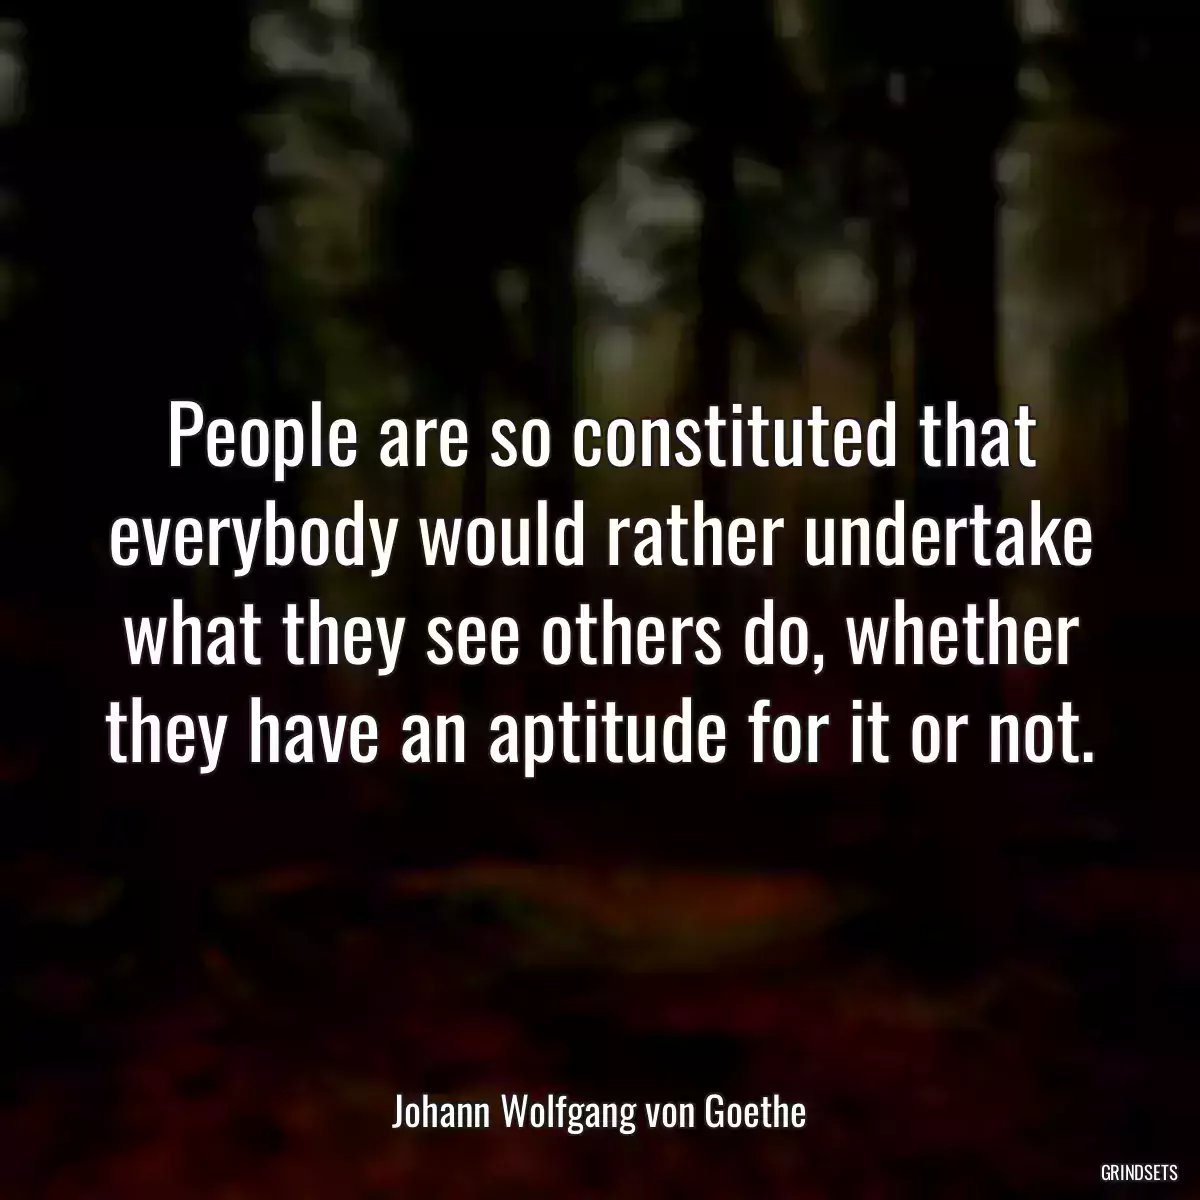 People are so constituted that everybody would rather undertake what they see others do, whether they have an aptitude for it or not.